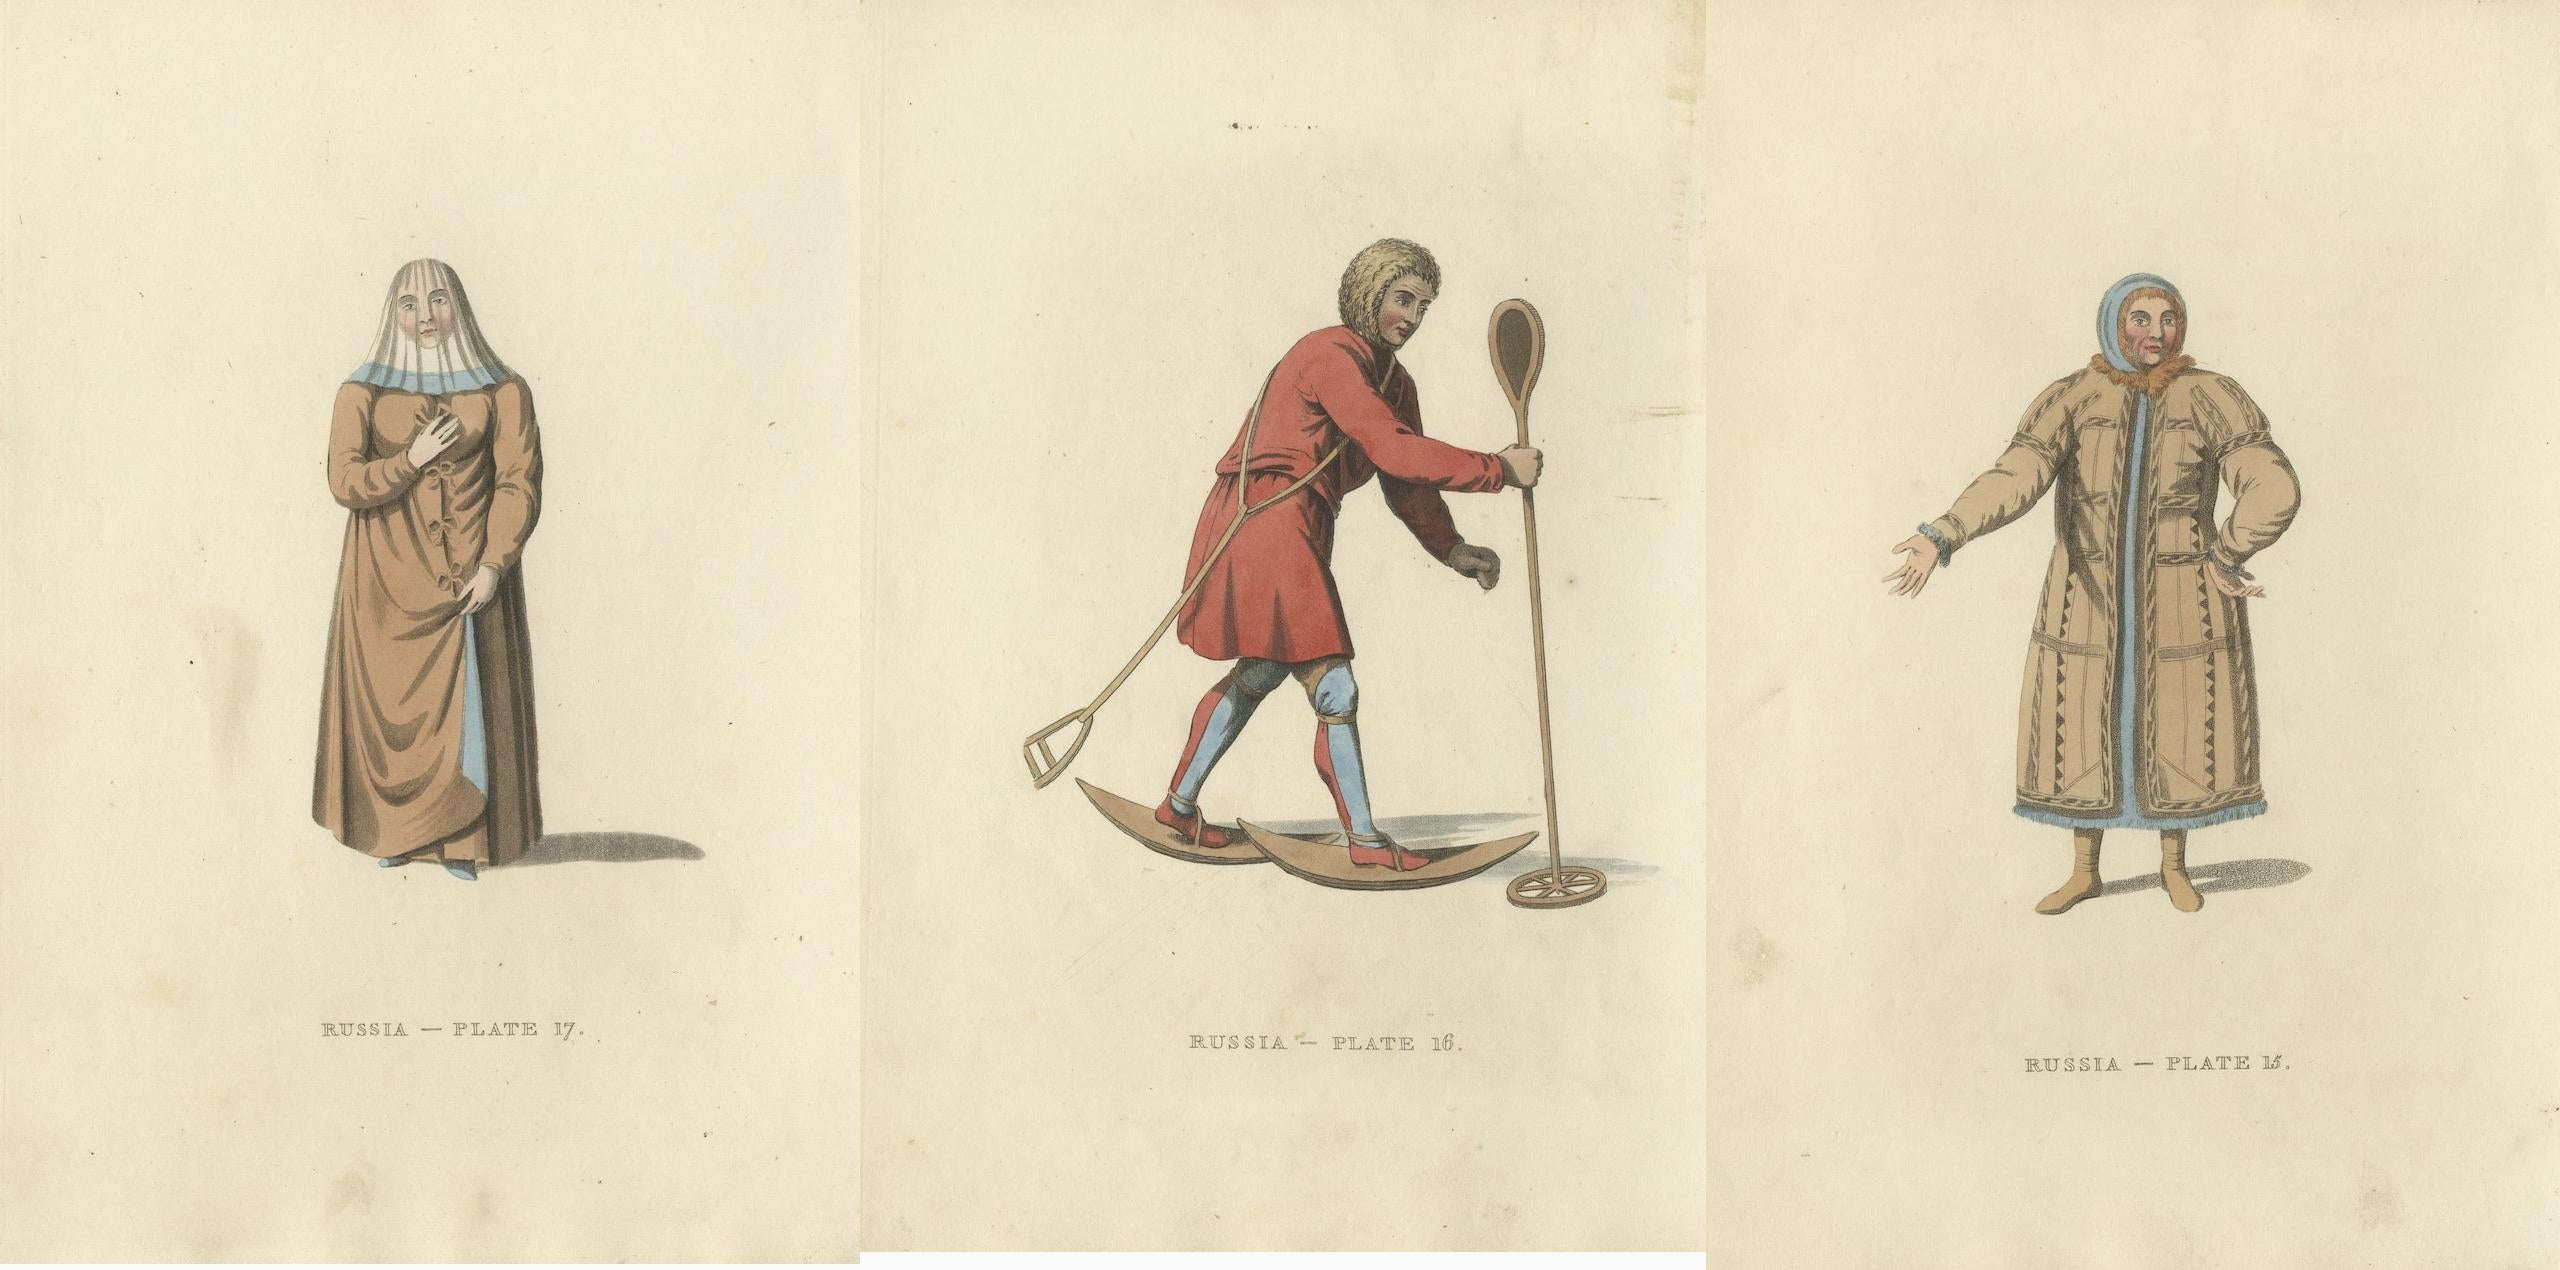 These original antique images are hand-colored and from the publication 